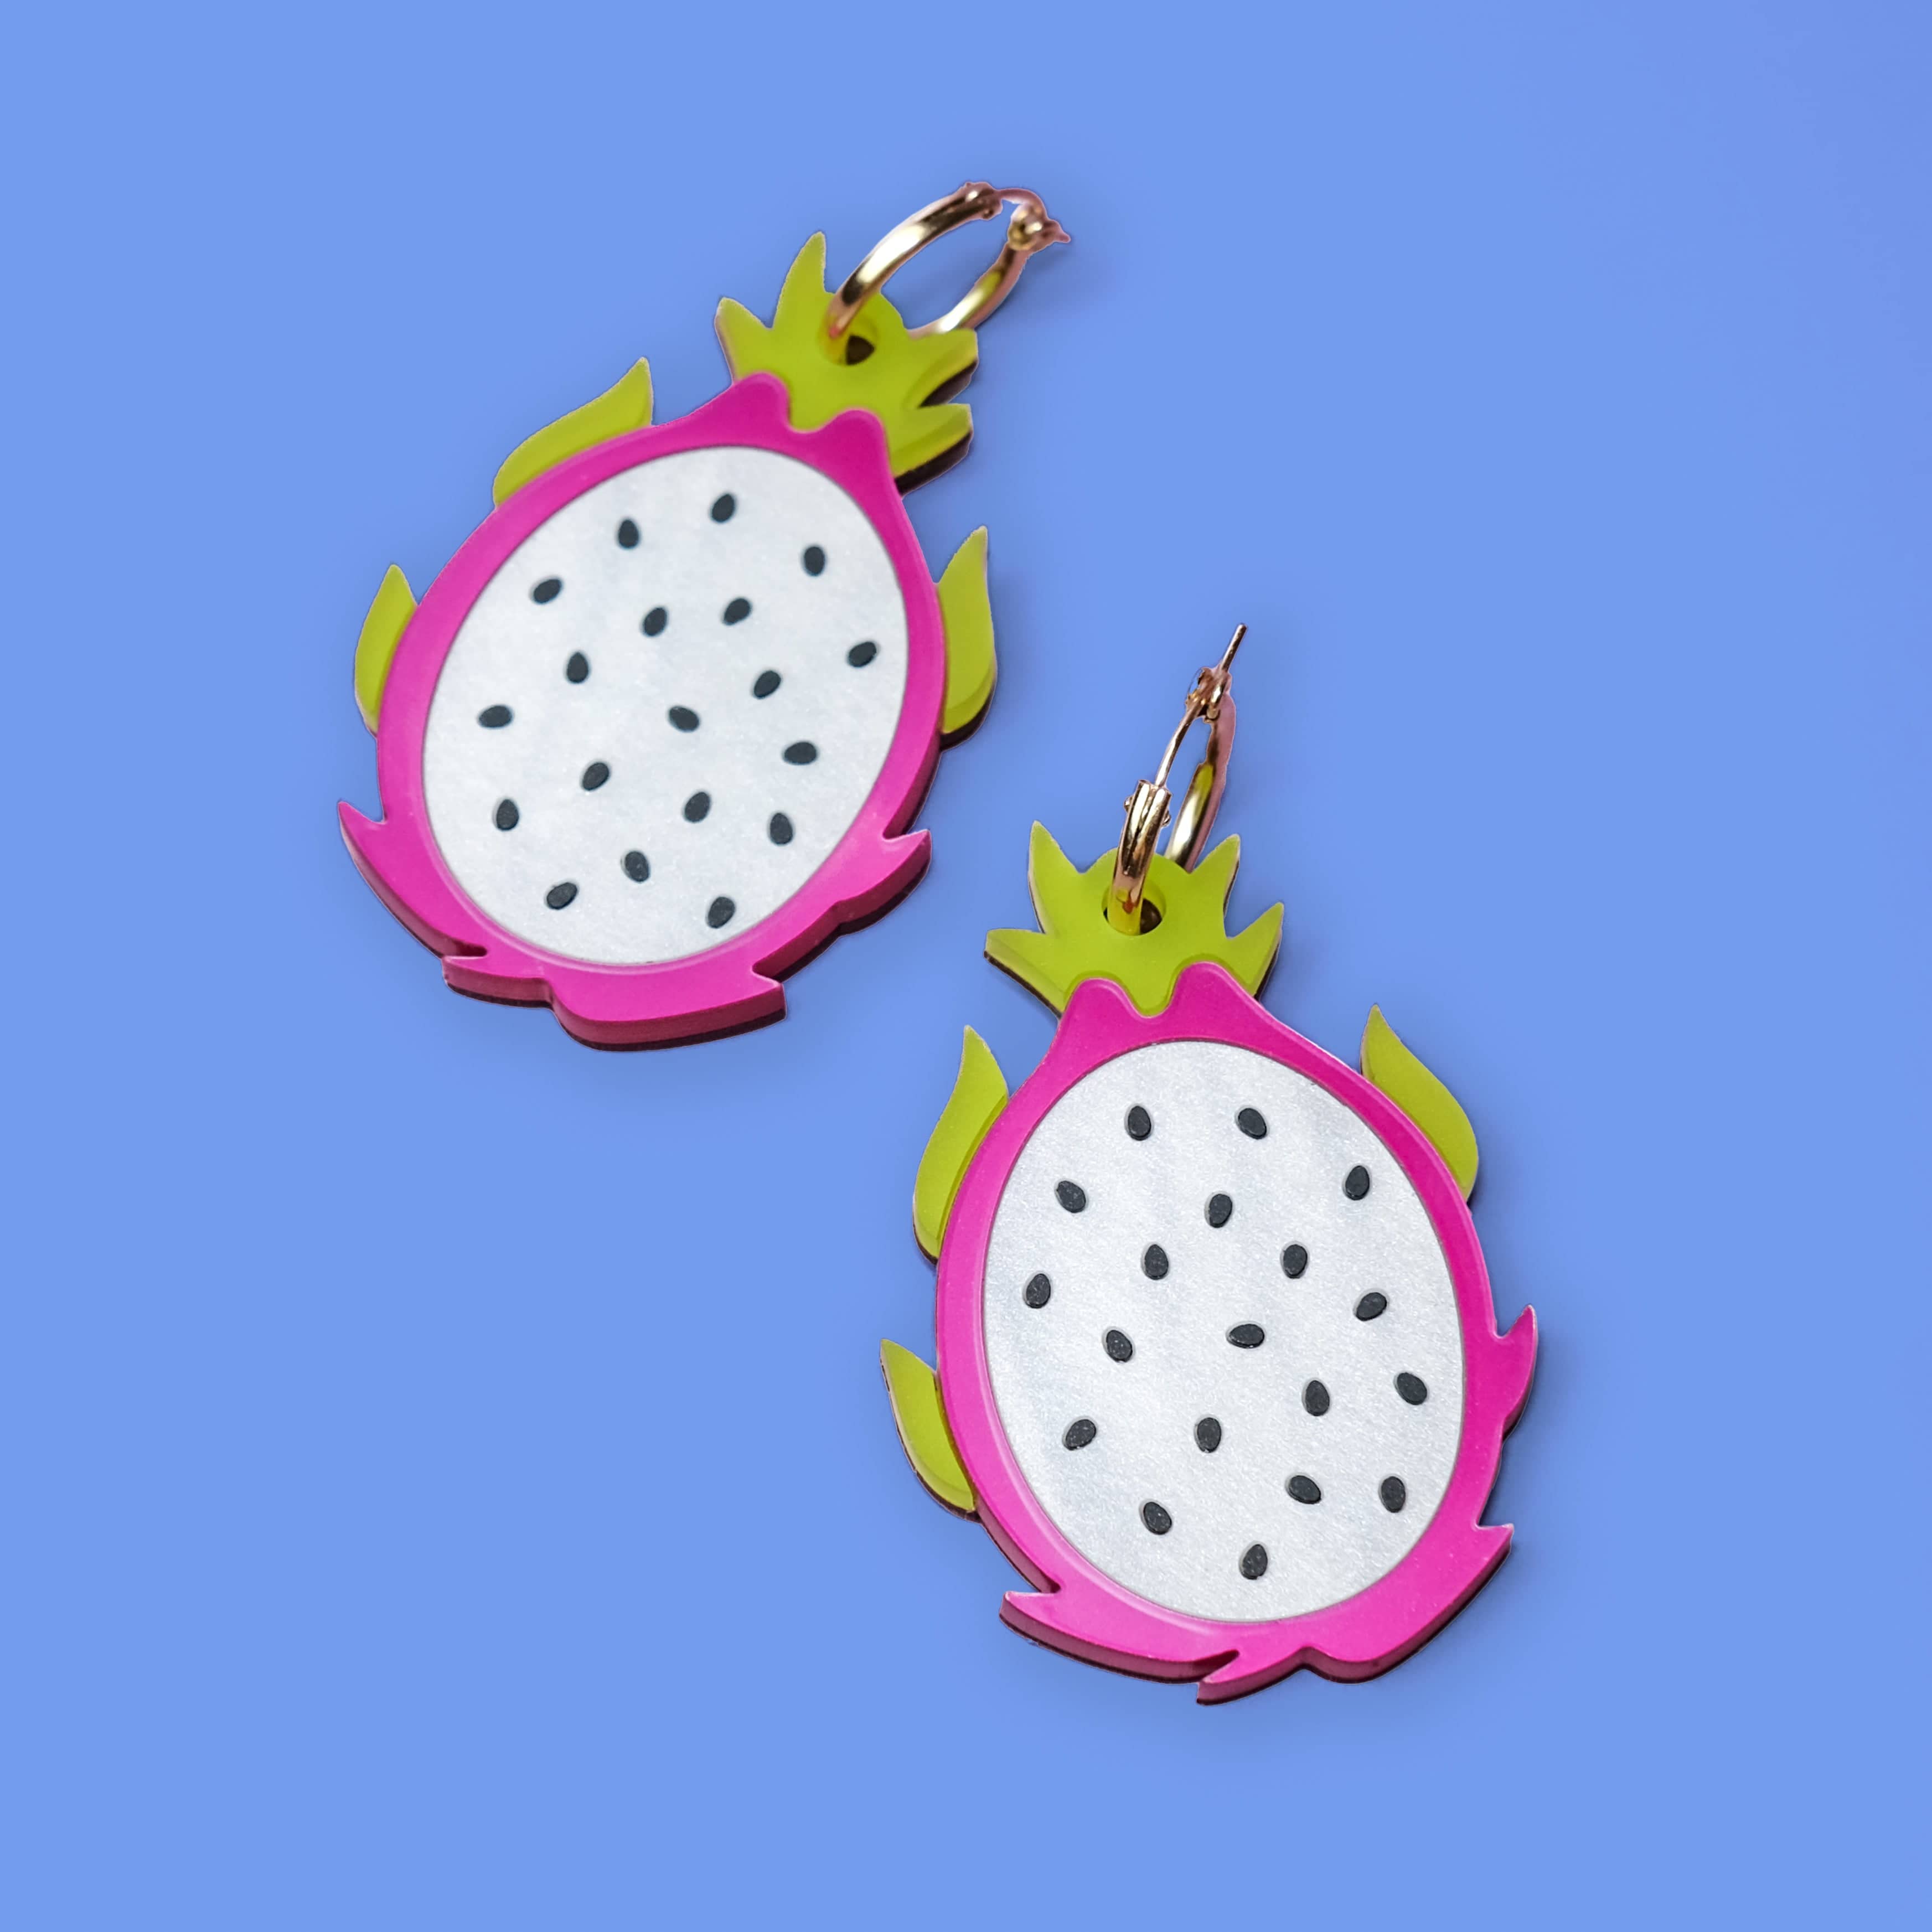 Unique statement Dragonfruit dangly earrings with gold-filled hoops